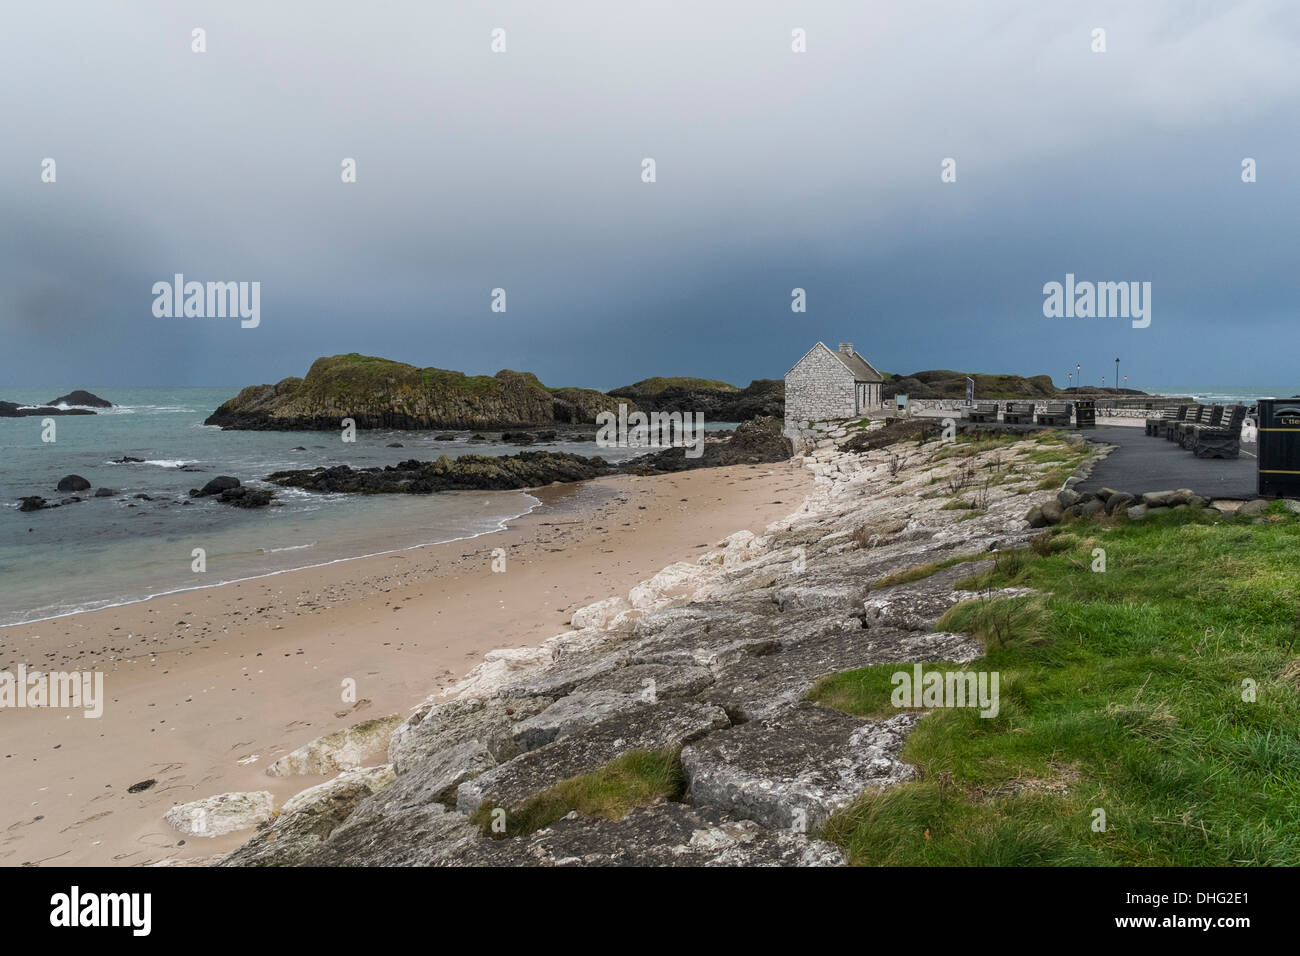 Looking down Ballintoy beach towards the harbour cafe, with a stormy sky developing in the distance. Stock Photo